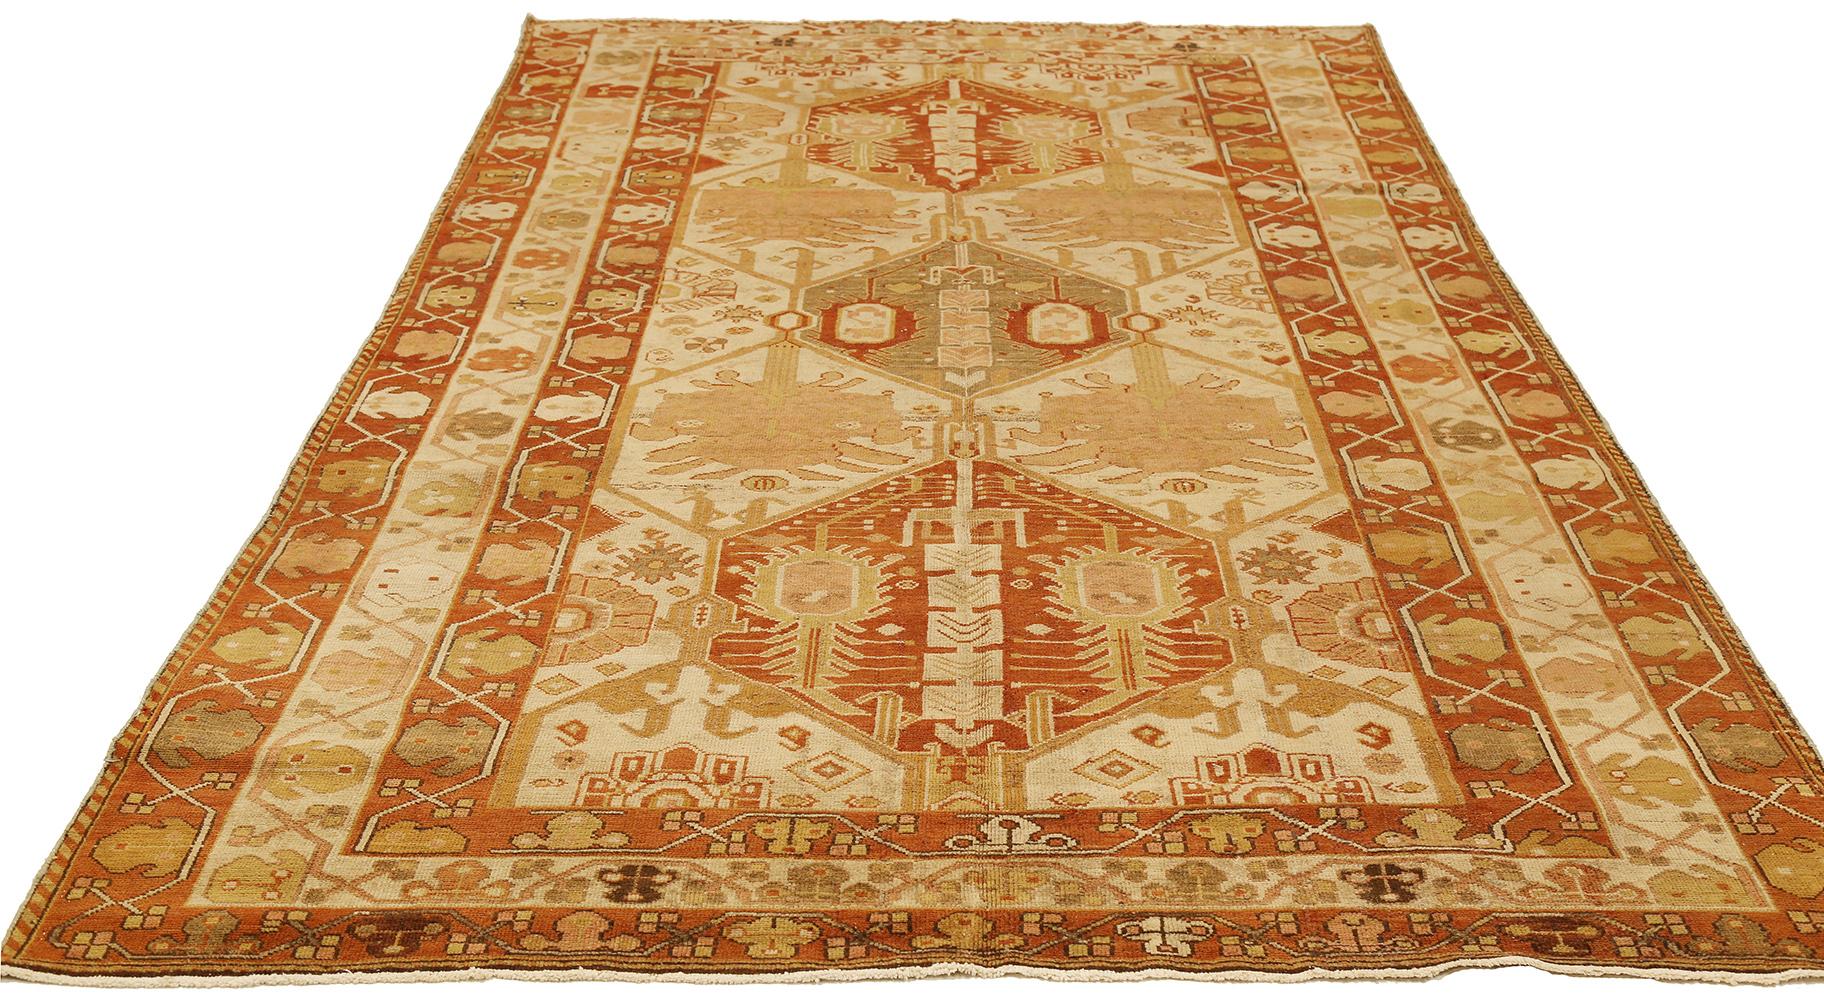 Antique Persian rug handwoven from the finest sheep’s wool and colored with all-natural vegetable dyes that are safe for humans and pets. It’s a traditional Kerman weaving featuring an elegant botanical medallions with an ensemble of floral designs